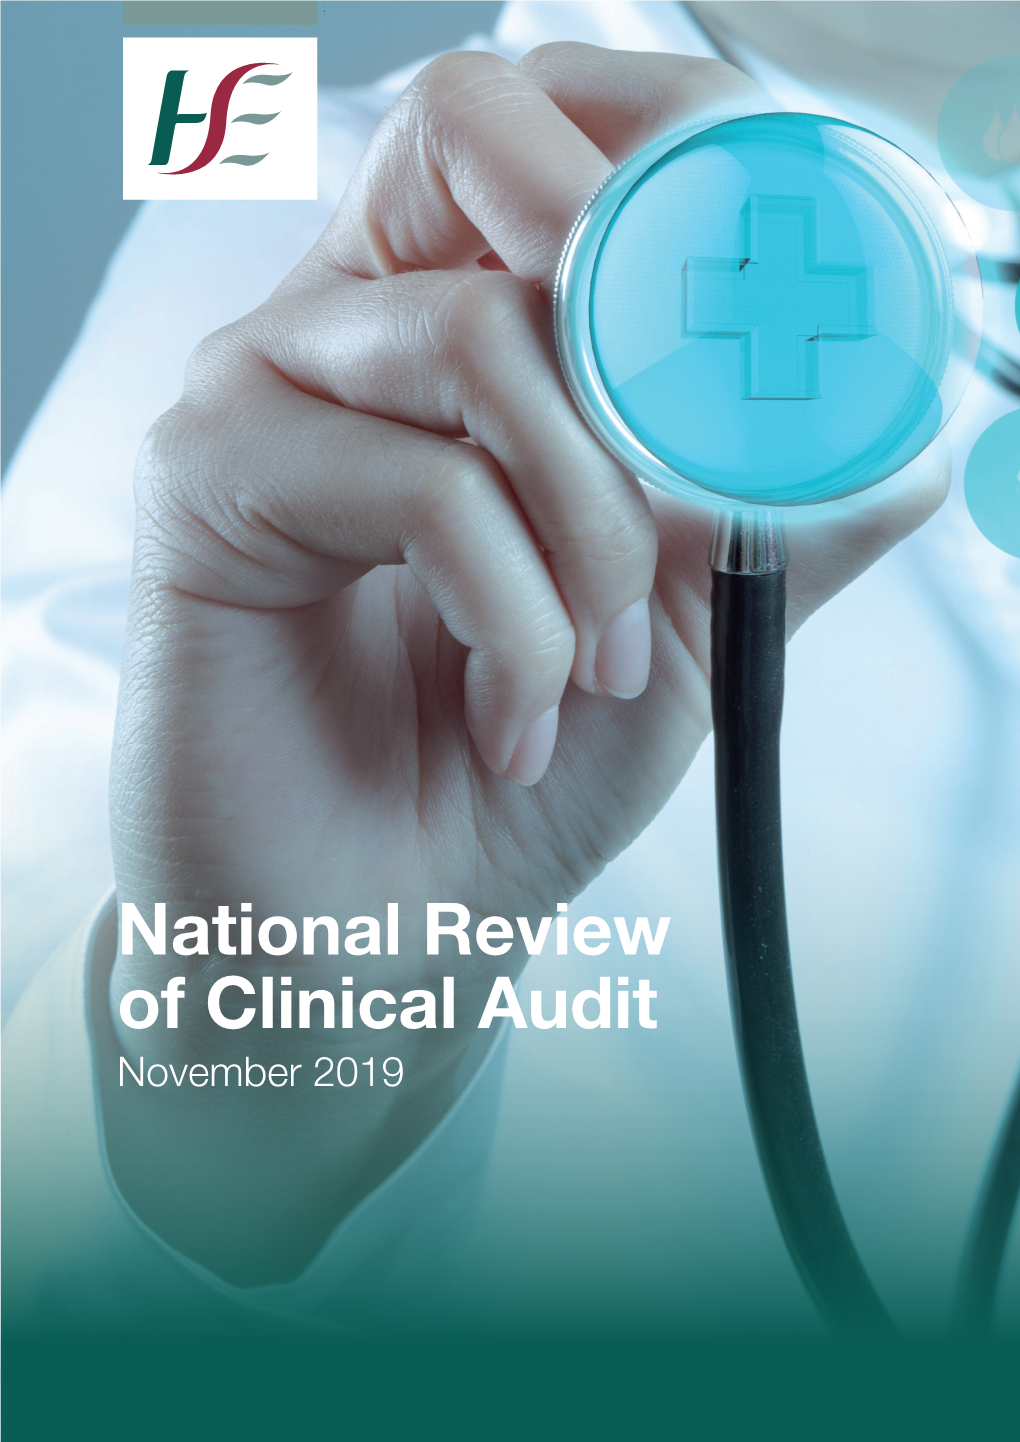 The National Review of Clinical Audit Report